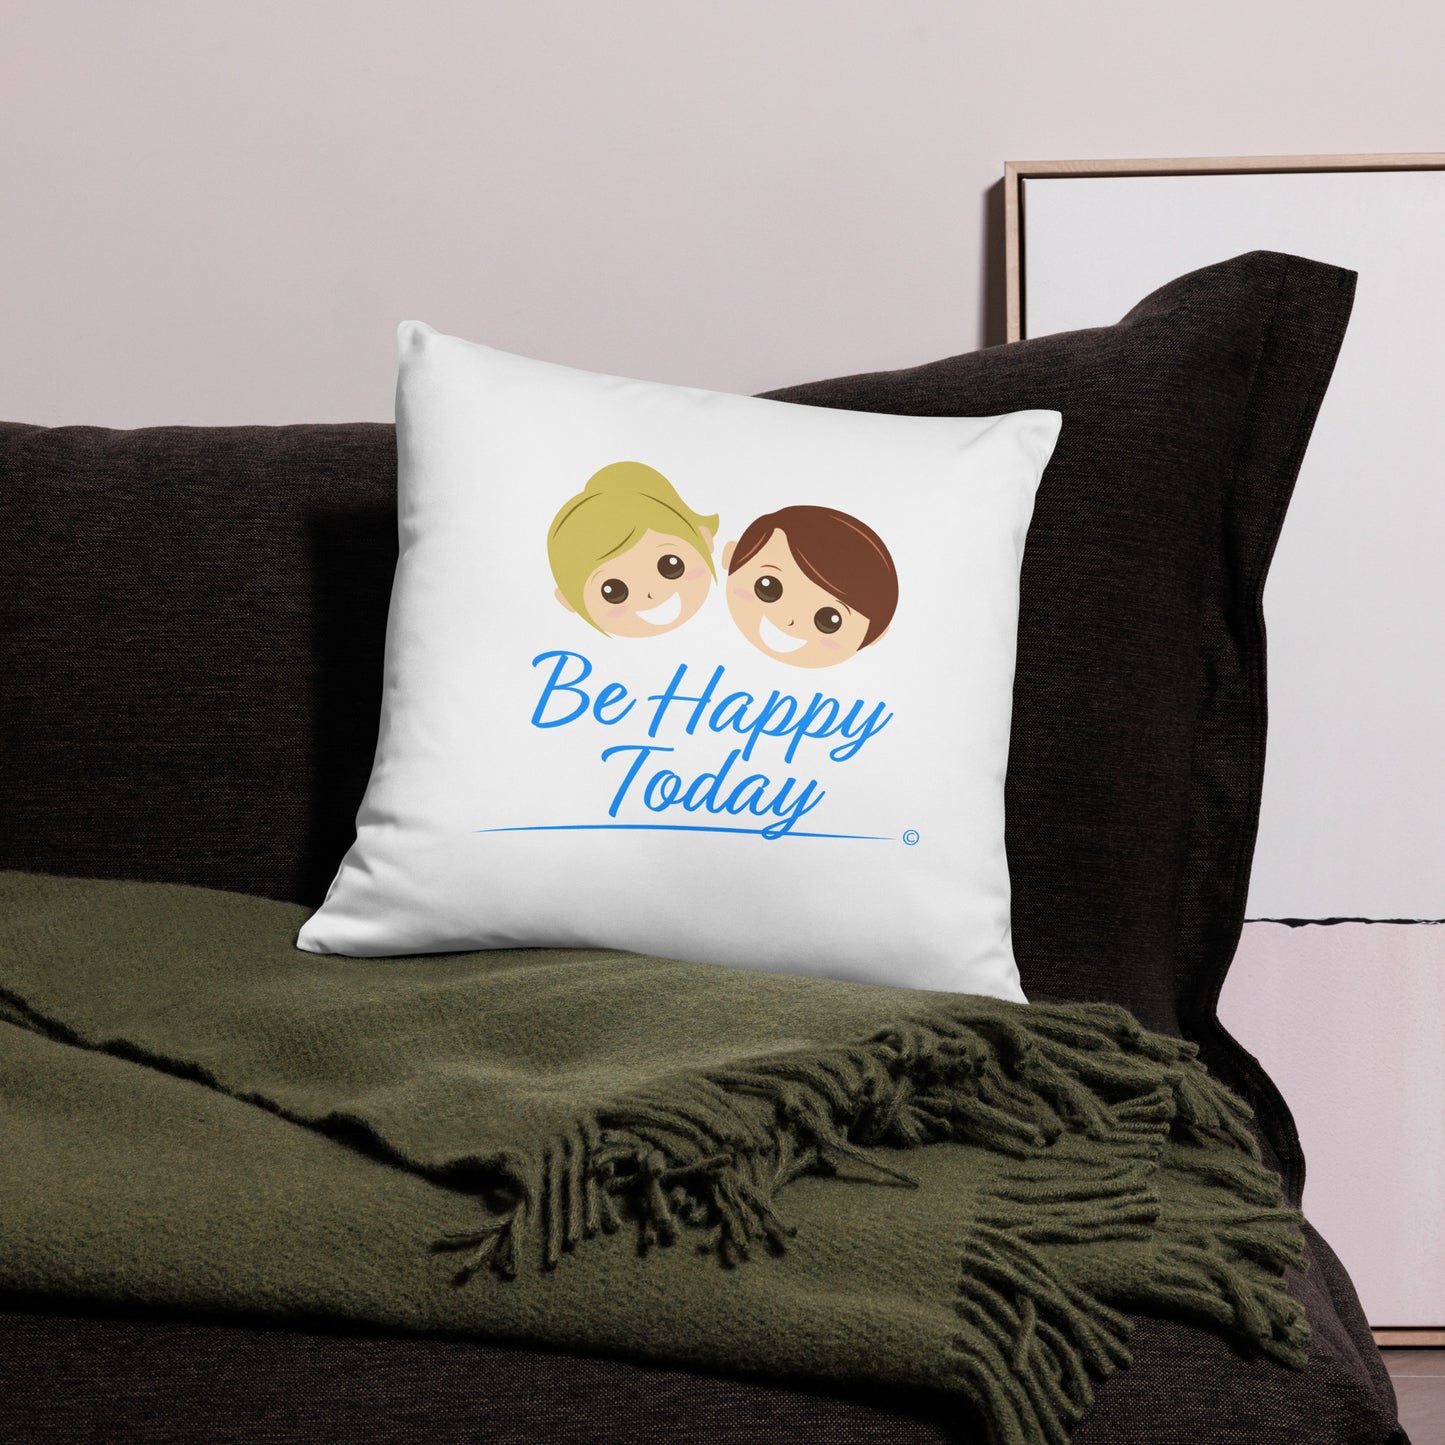 Cheerful 18x18 throw pillow radiating positivity with the message 'Be Happy Today,' resting on a black bed and a vibrant green scarf.